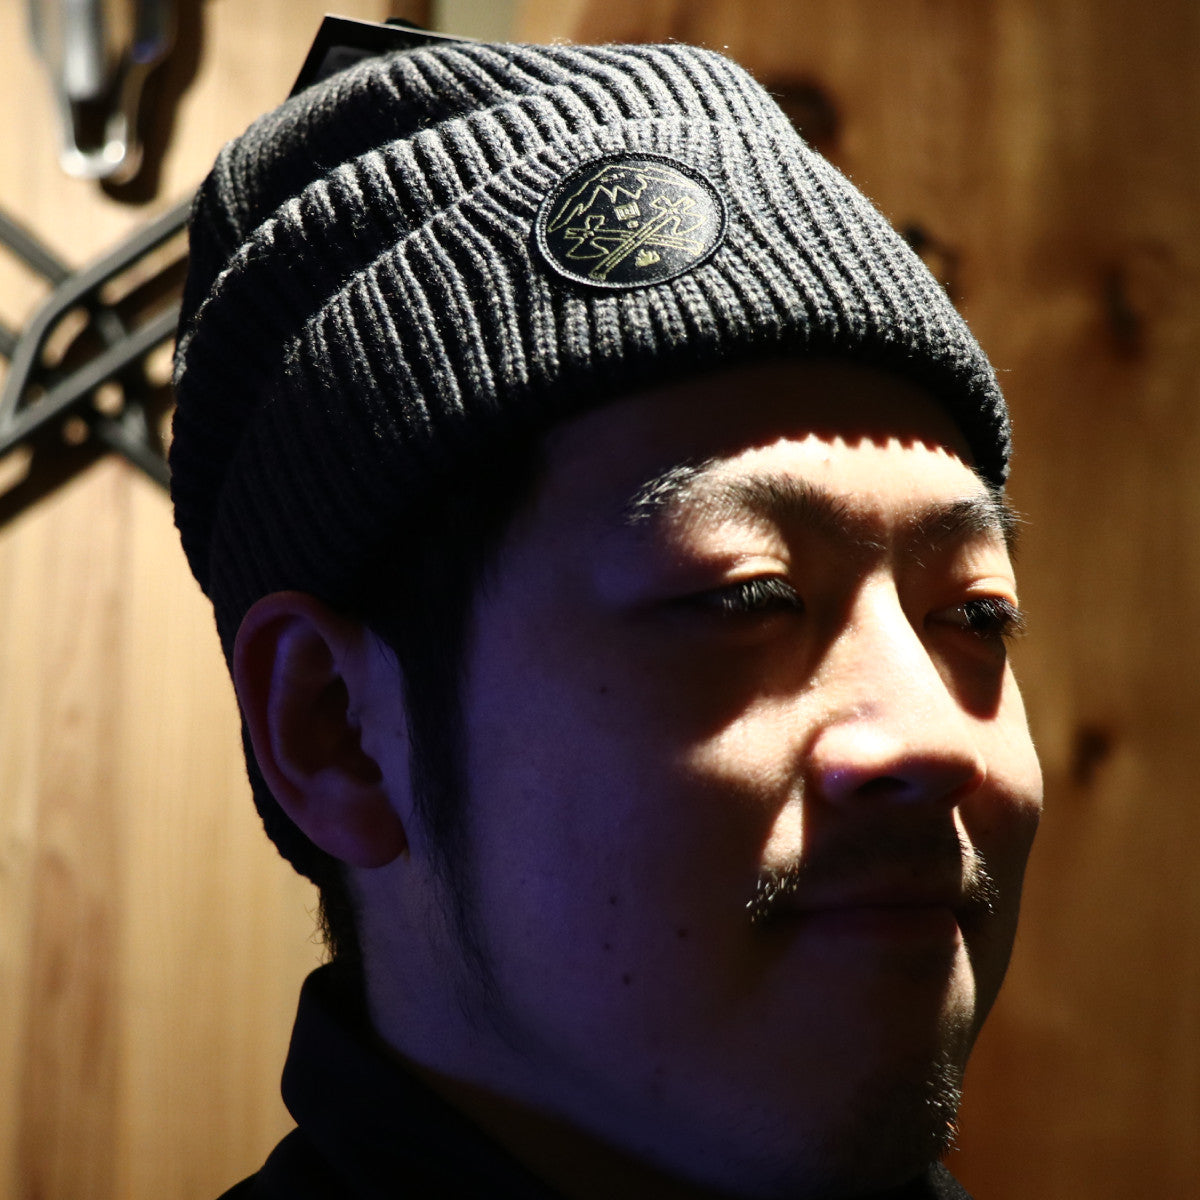 CROSSED AXE MOUNTAIN BEANIE – 5.11 Tactical Japan